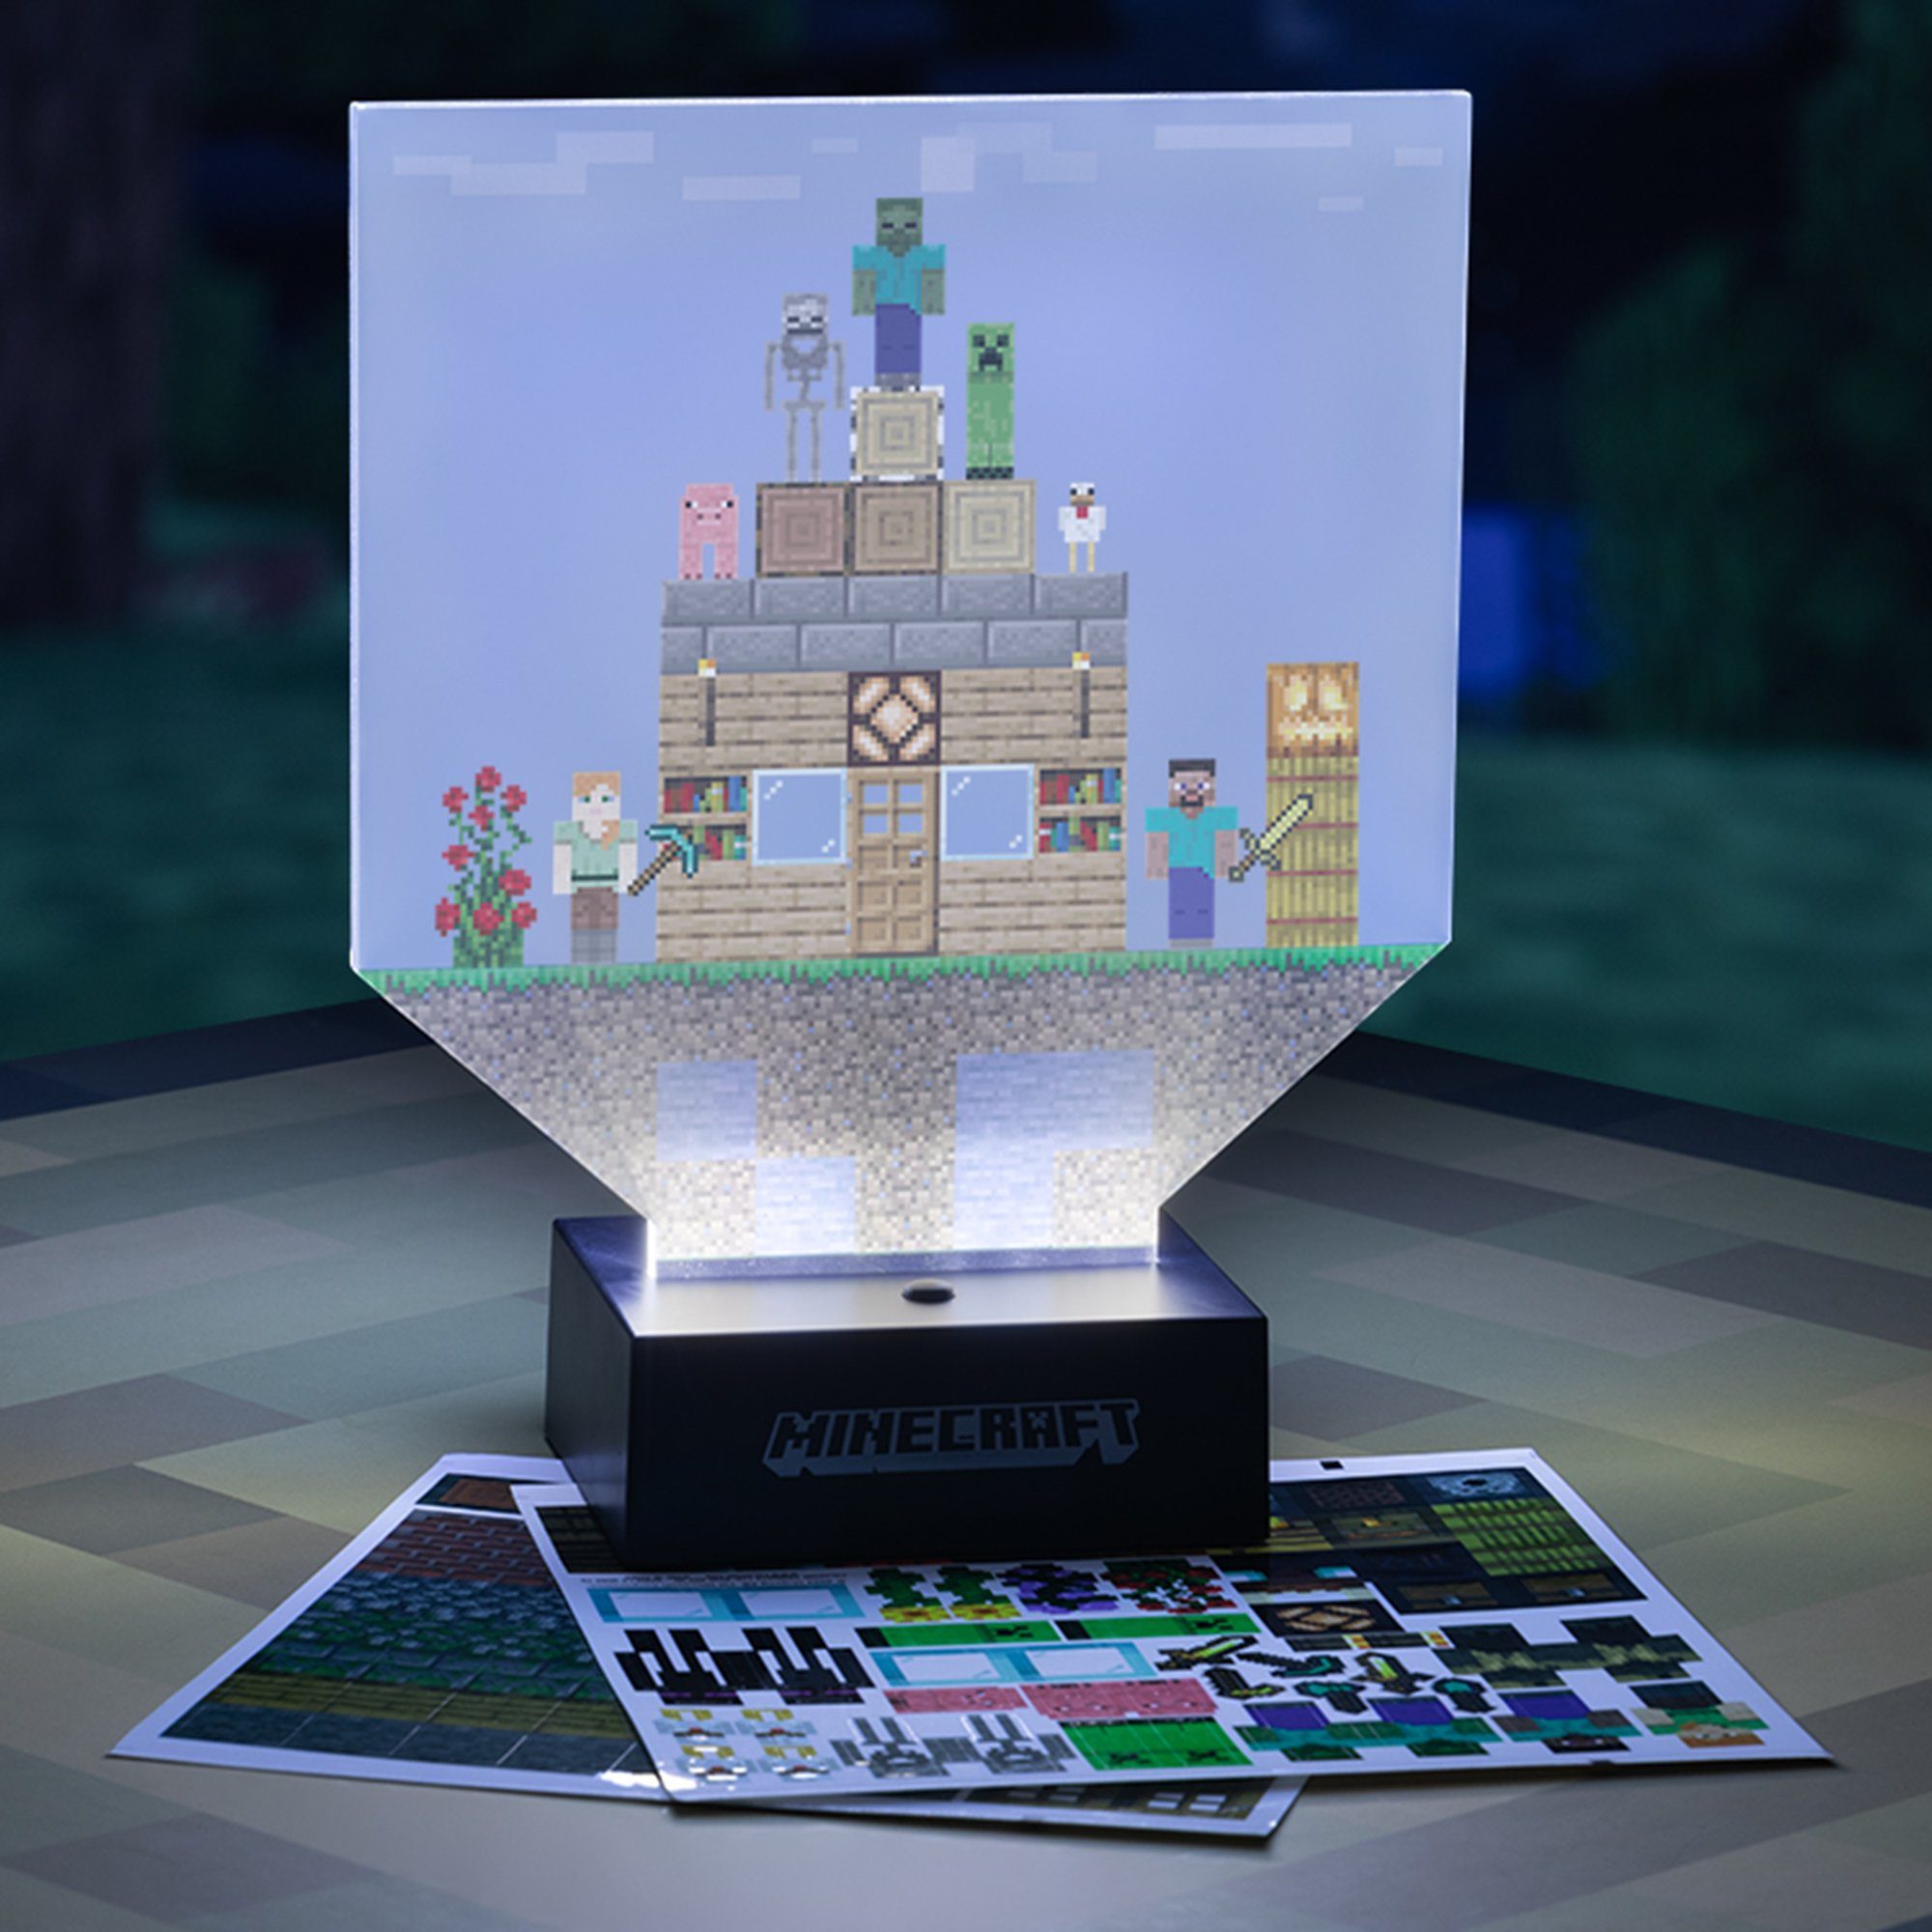 Paladone Stehlampe Minecraft Build a Lampe Level